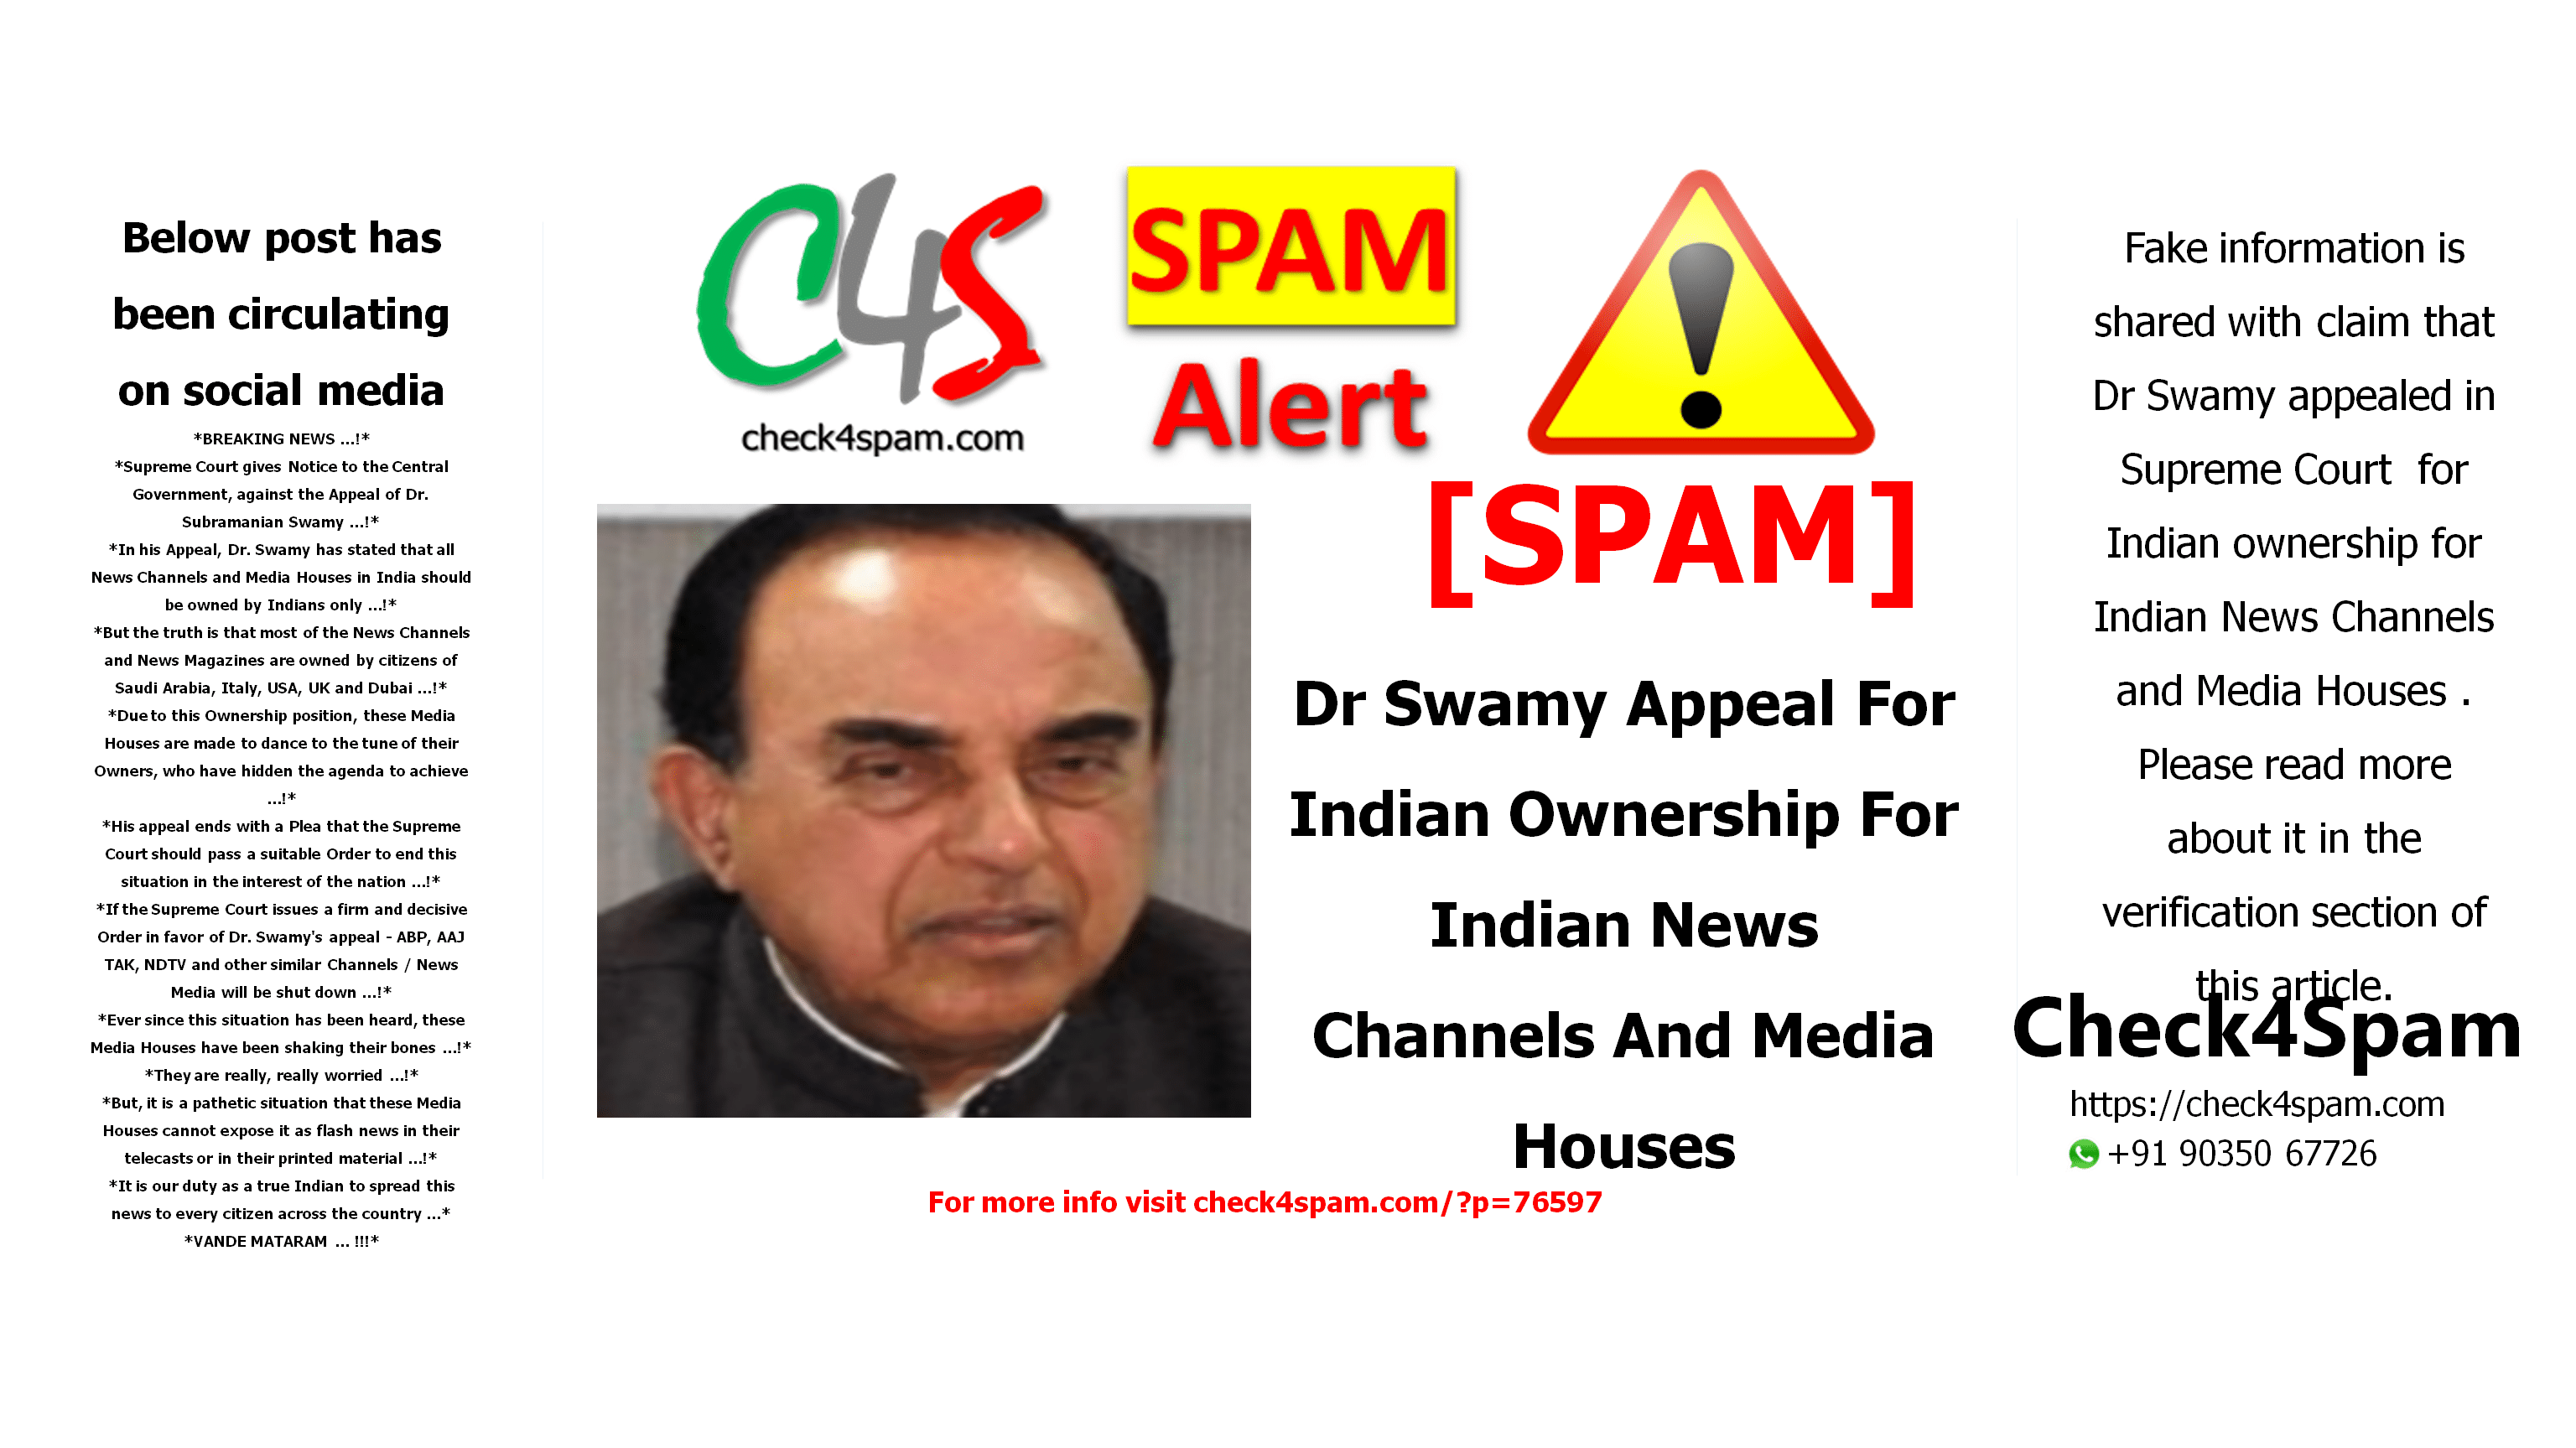 Dr Swamy Appeal For Indian Ownership For Indian News Channels And Media Houses